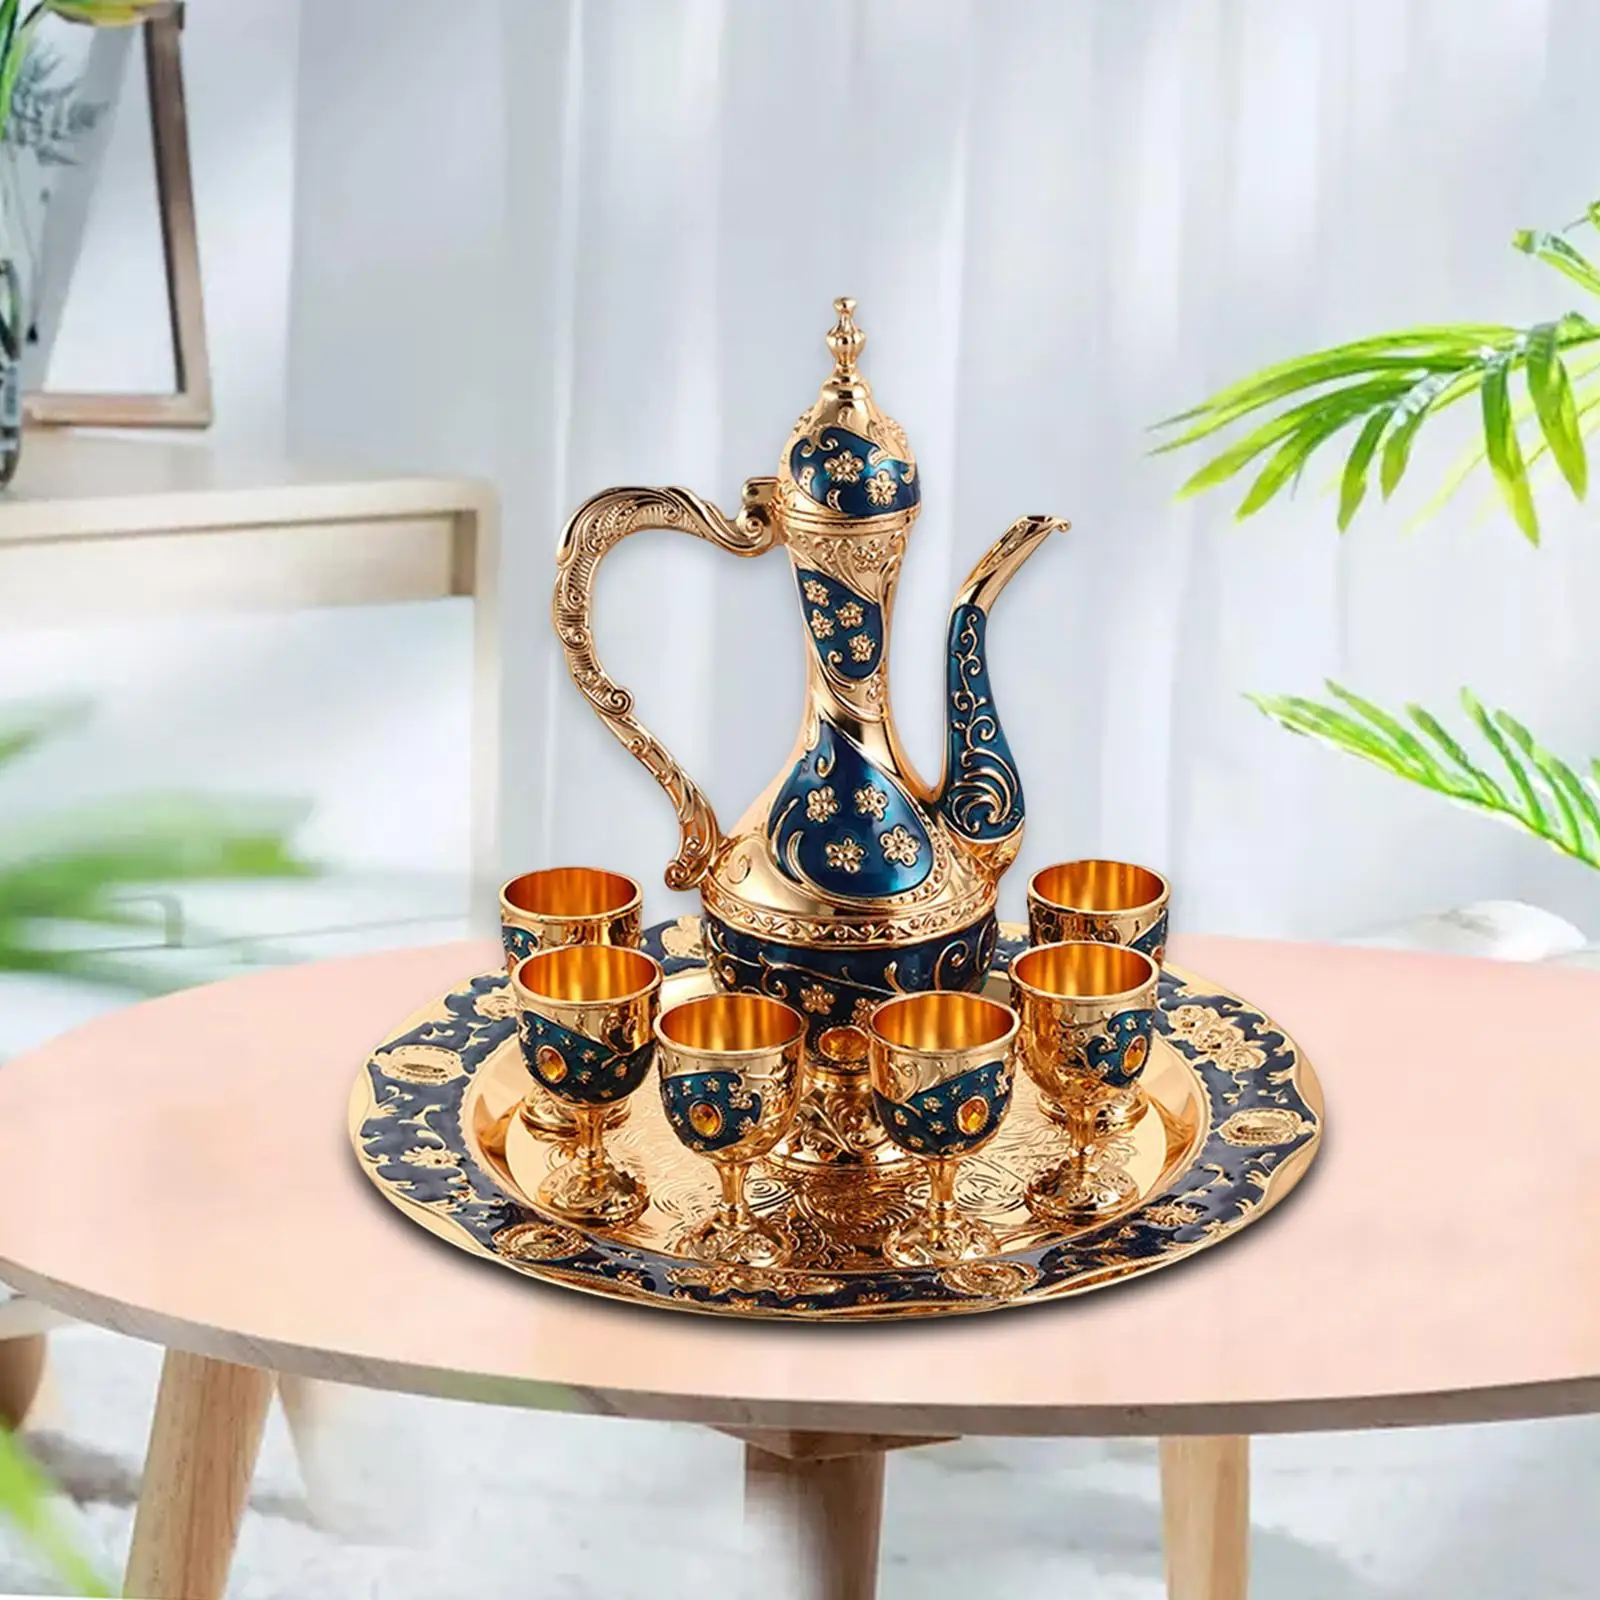 Luxury Tea Pot Set with Cups Water Serving Set for Living Room Party Decor